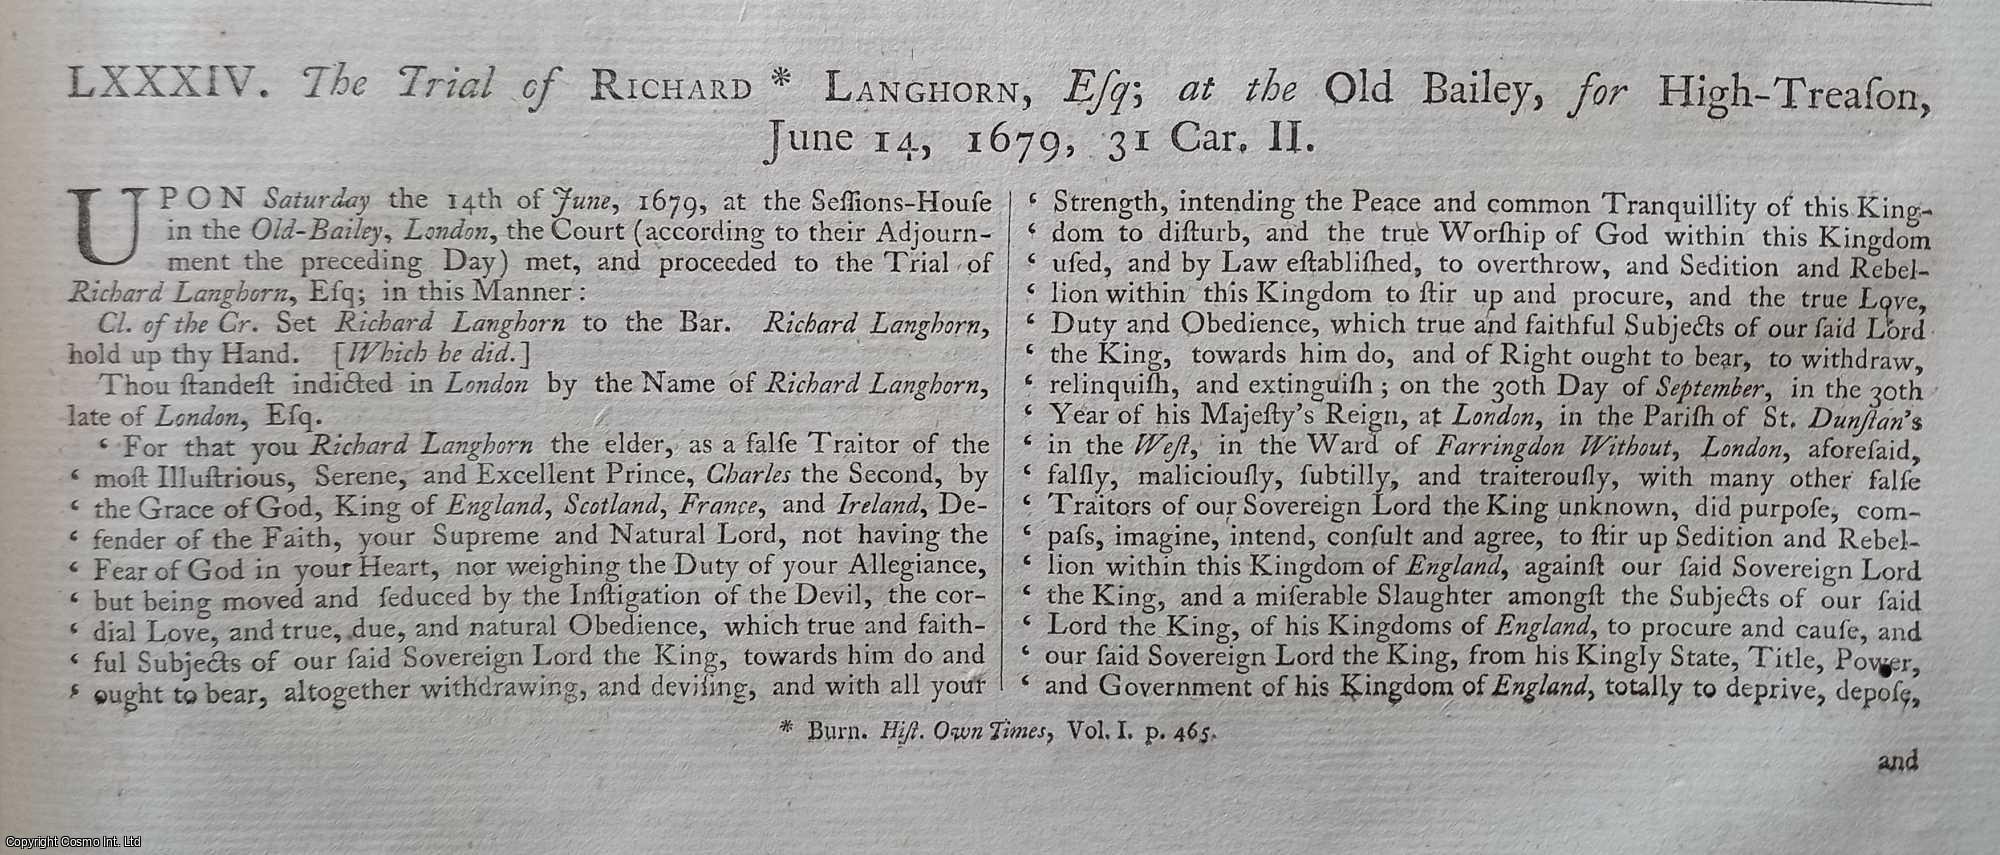 [Trial] - The Trial of Richard Langhorn, esq. at the Old Bailey, for High Treason, June 14, 1679. An original article from the Collected State Trials.